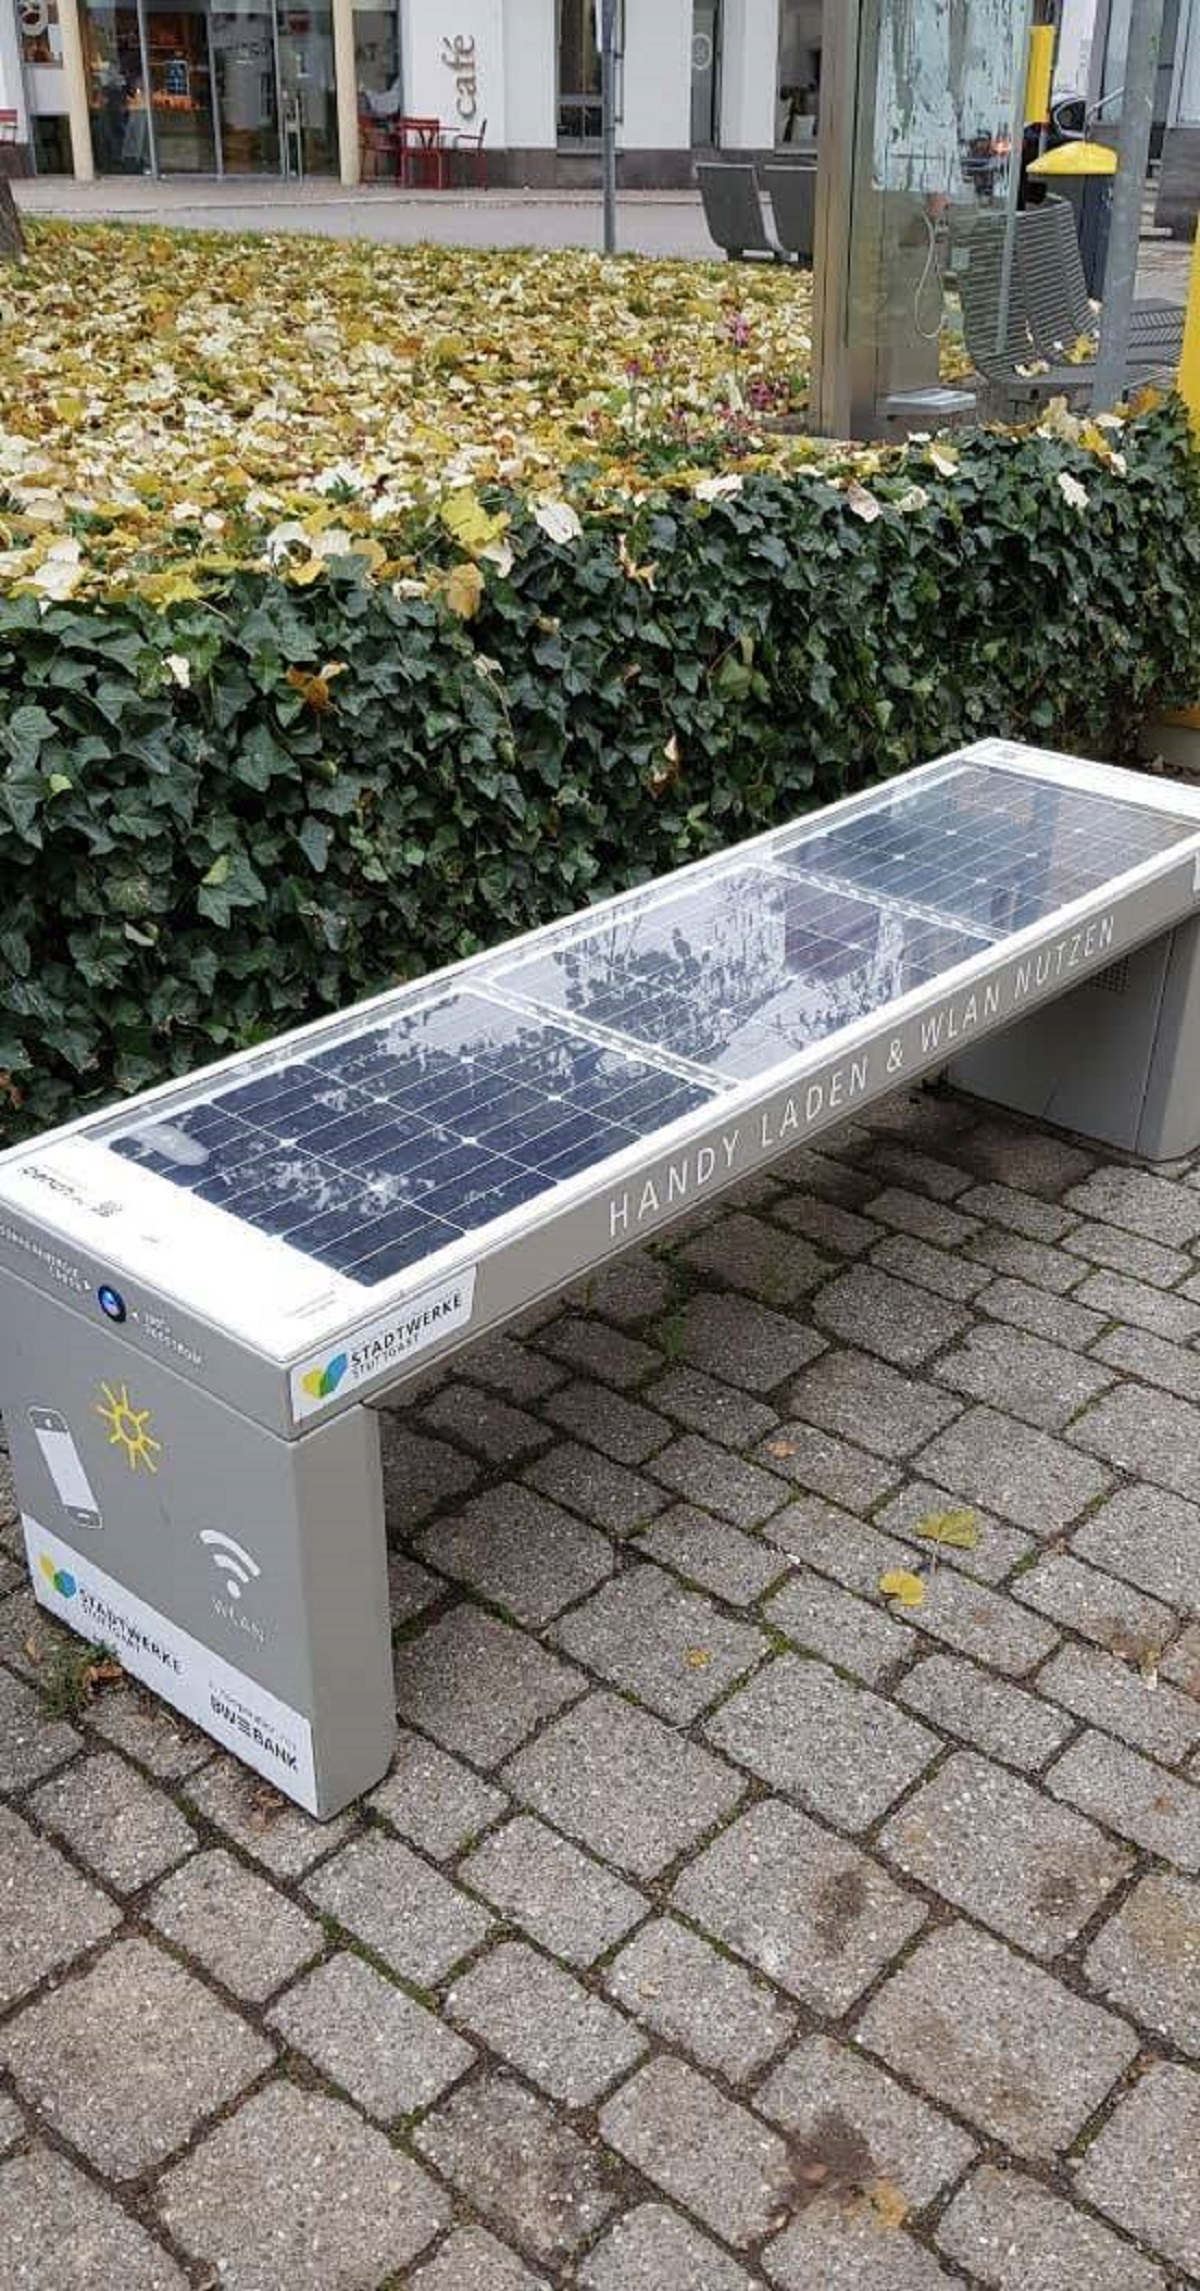 Solar-powered charging benches should 100% be a thing worldwide, and not just in certain countries, like this one in Germany.